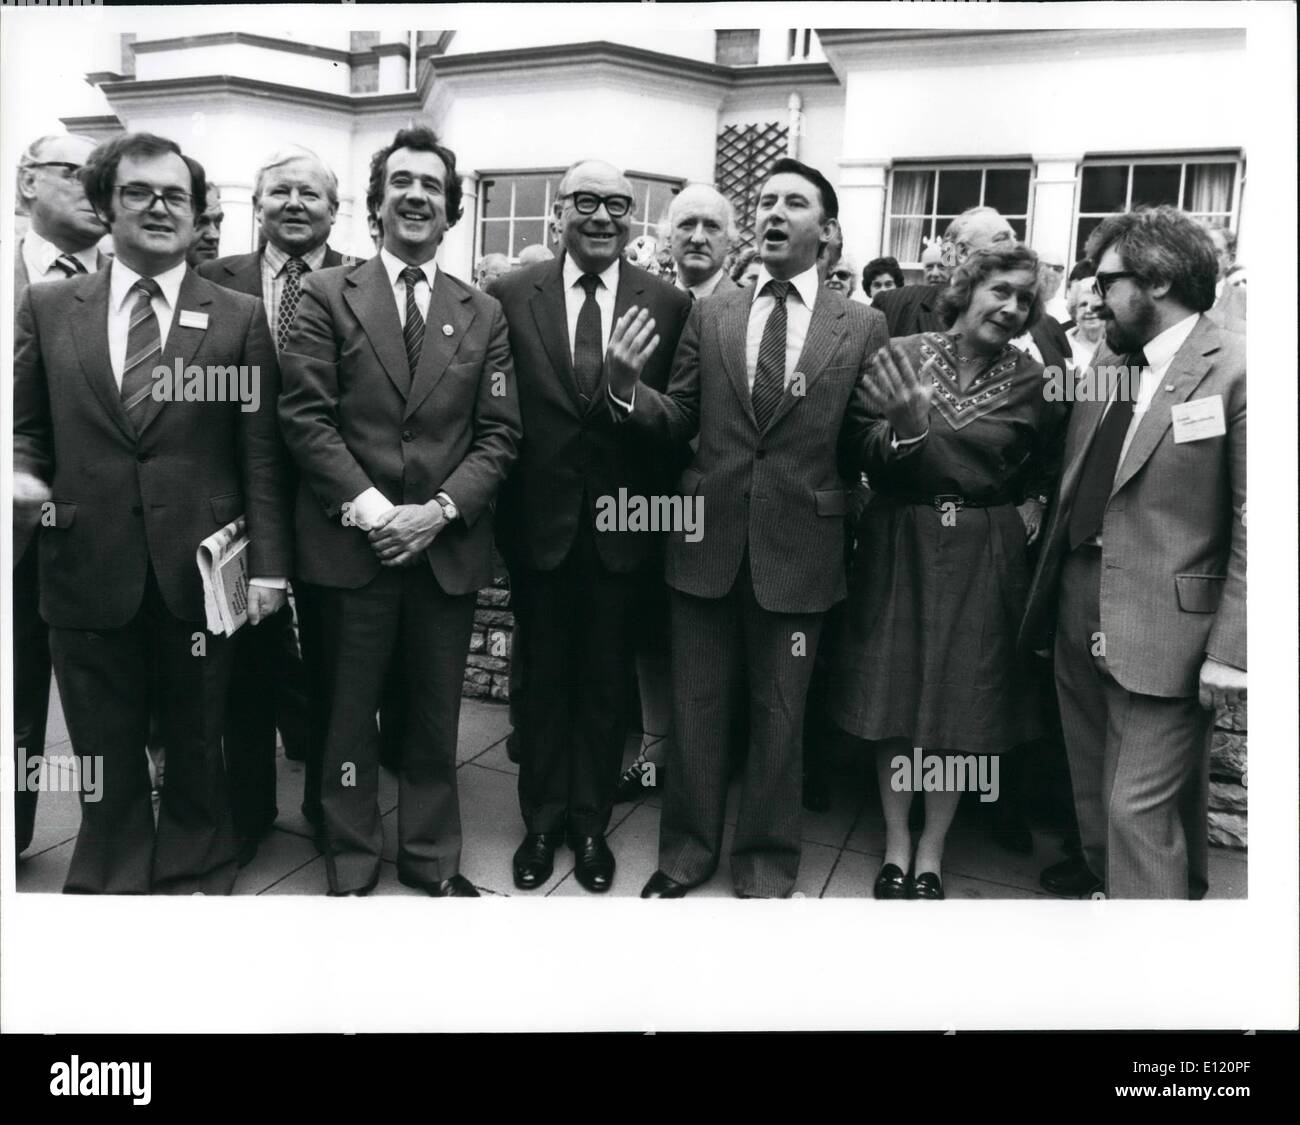 Sep. 09, 1981 - Liberal Party Conference: The historic decision to form an alliance between the Liberal Party and the Social Democrat Party, was made today at the Liberal Party Conference in Llandudo, carried by a majority vote of 1600 to 112. Photo shows the Liberal and SDP MP's (L to R) Alan Baith 9Lib) Richard Wainright (Lib) Bill Rodgers (SDP) Jo Grimond (Lib) David Steel (Lib) Cyril Smith (Lib) Shirley Williams (SDP) Mike Thomas (SDP) outside the conference hall. Stock Photo